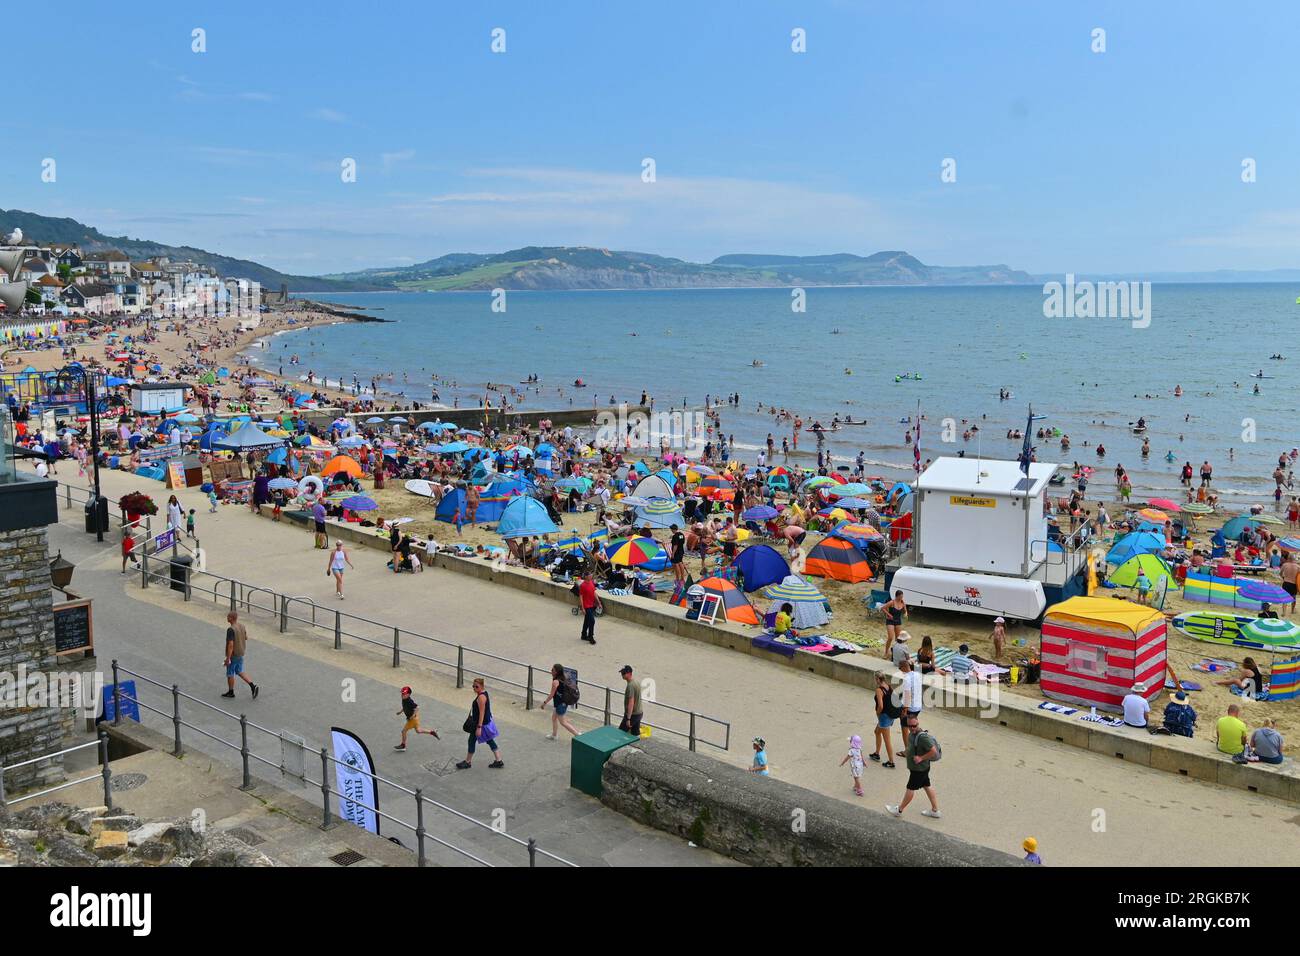 Lyme Regis. On a very hot and humid afternoon hundreds of people are seen on a fully packed beach and in the sea and sailing yachts' .Picture Credit: Robert Timoney/Alamy Live News Stock Photo